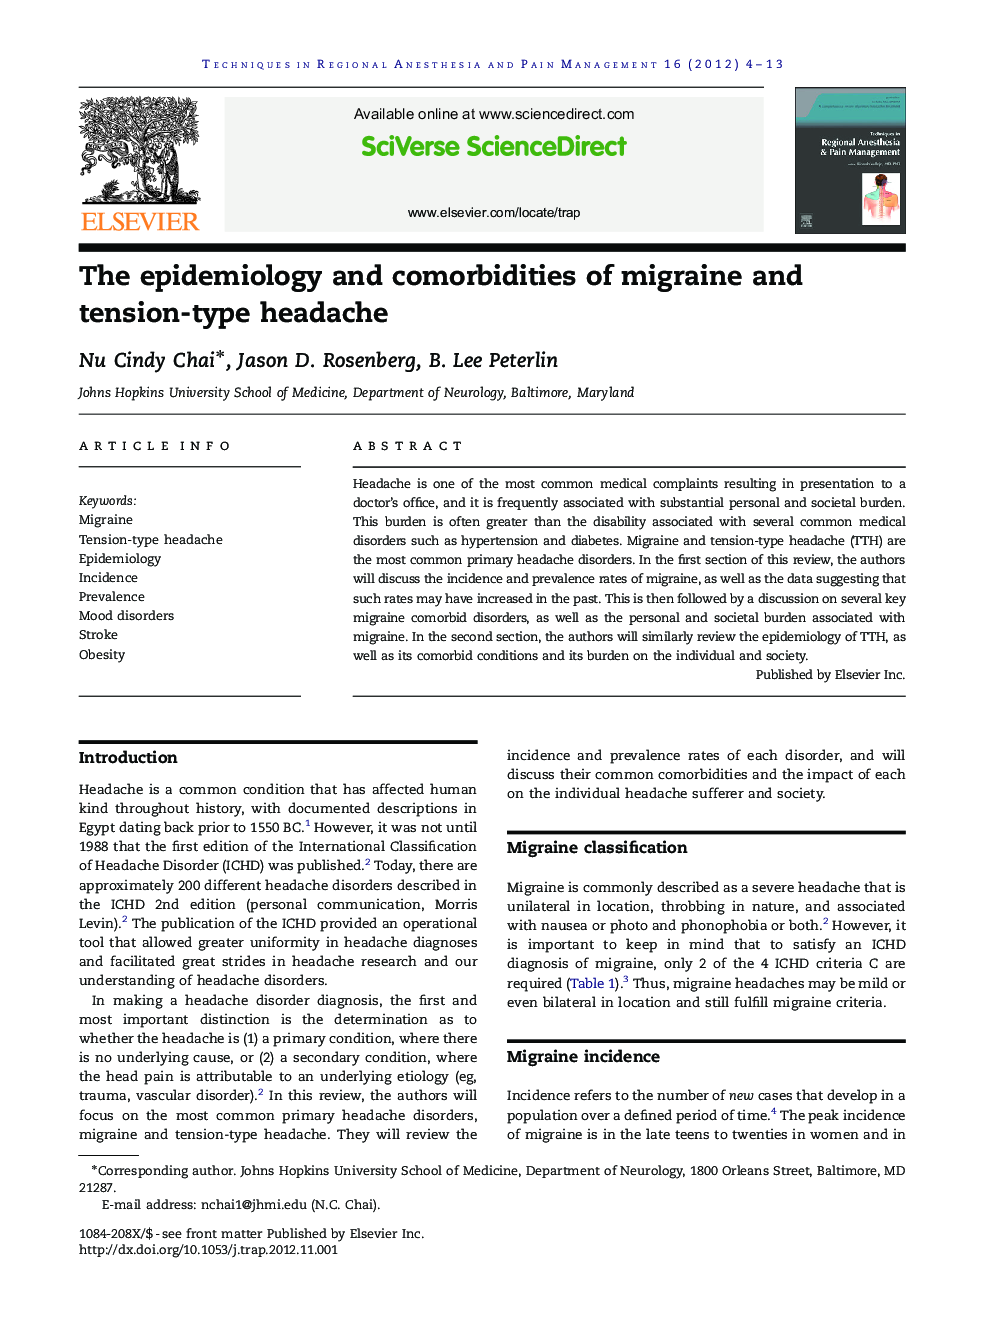 The epidemiology and comorbidities of migraine and tension-type headache